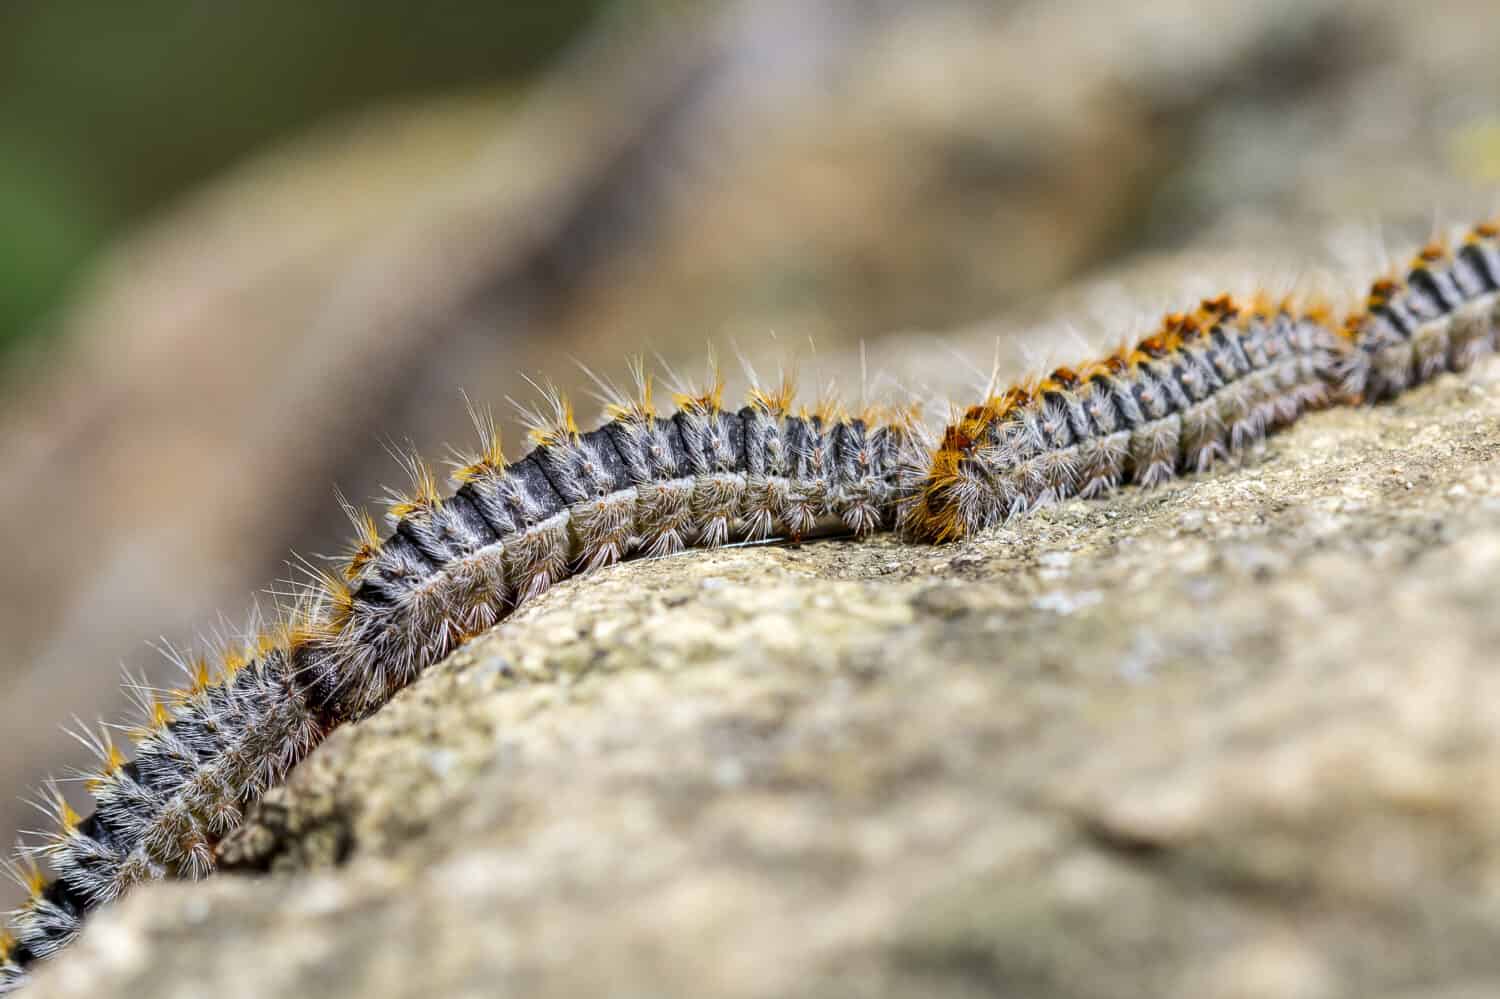 Pine processionary caterpillar's have venomous hairs that make them a danger to people on our must-visit island in Europe, Mallorca.